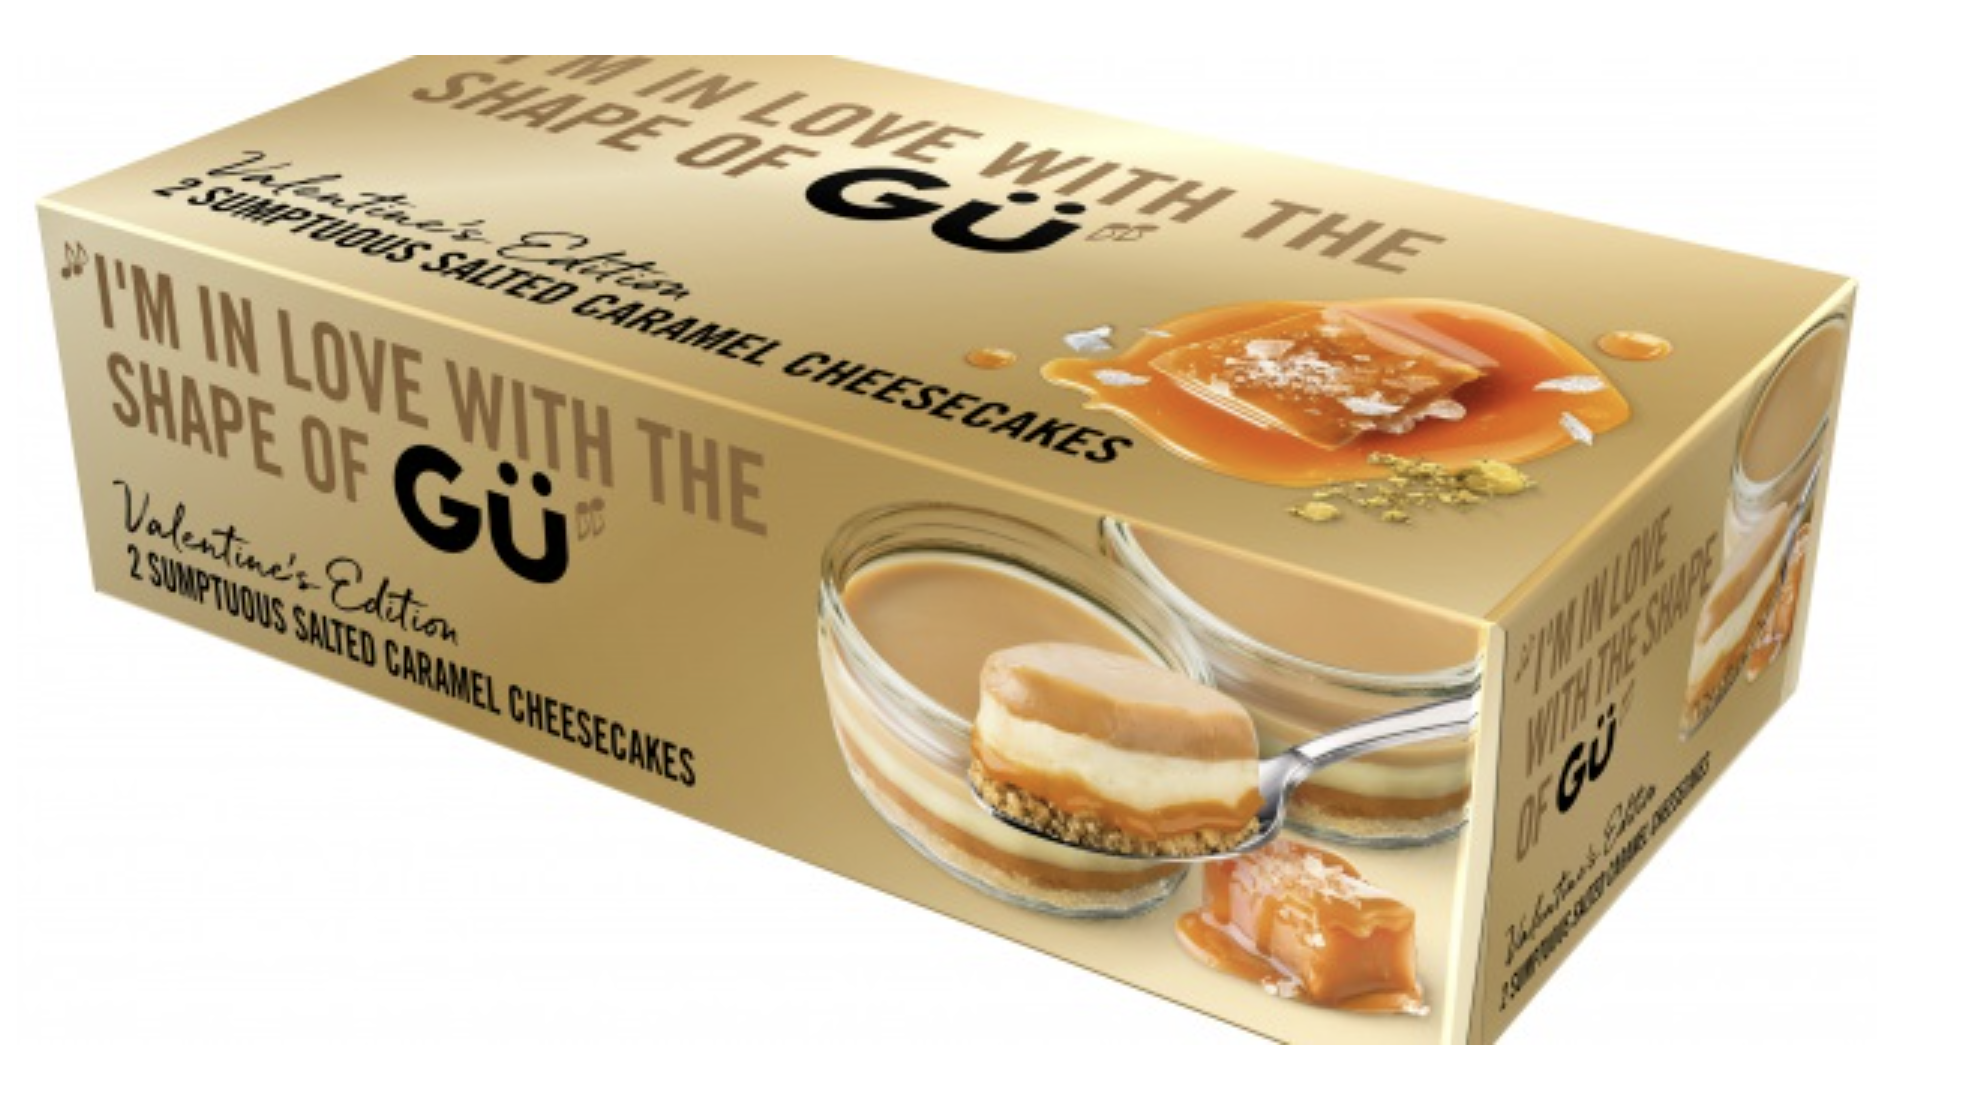 A box of cheesecakes that say "I'm in love with the shape of Gu" as part of Gu's Valentine's Day marketing campaign. 